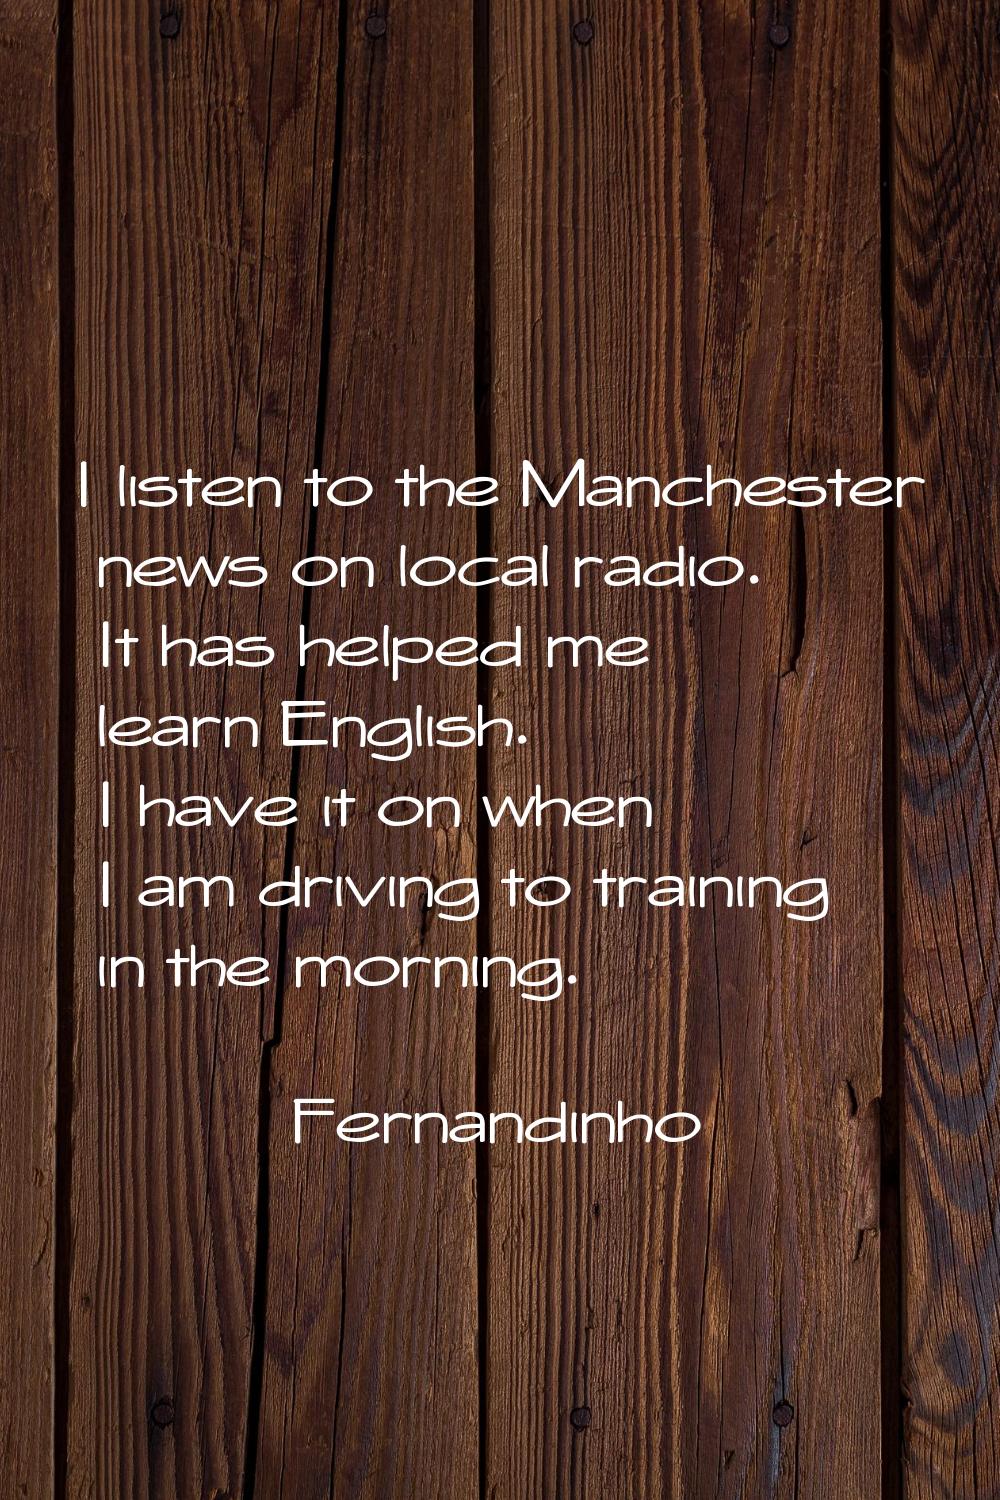 I listen to the Manchester news on local radio. It has helped me learn English. I have it on when I